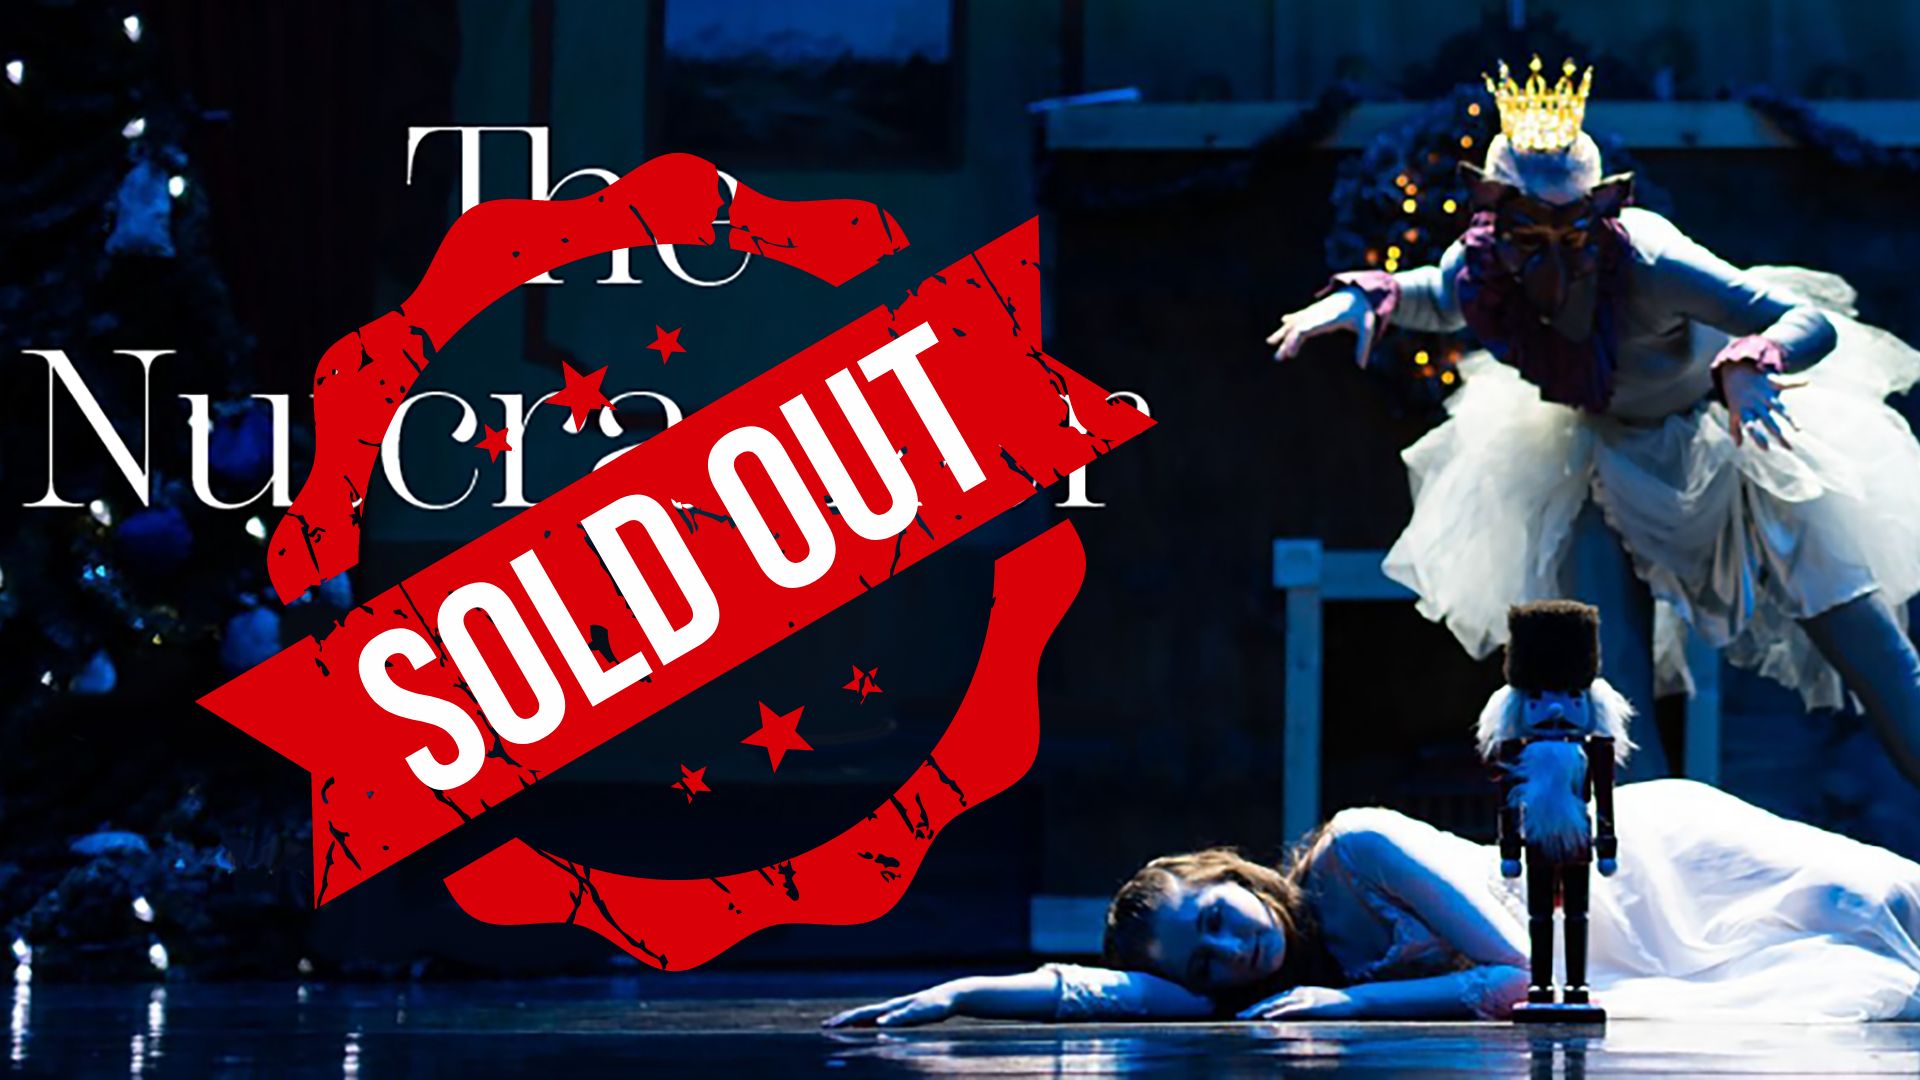 Nutcracker Sold Out (1)